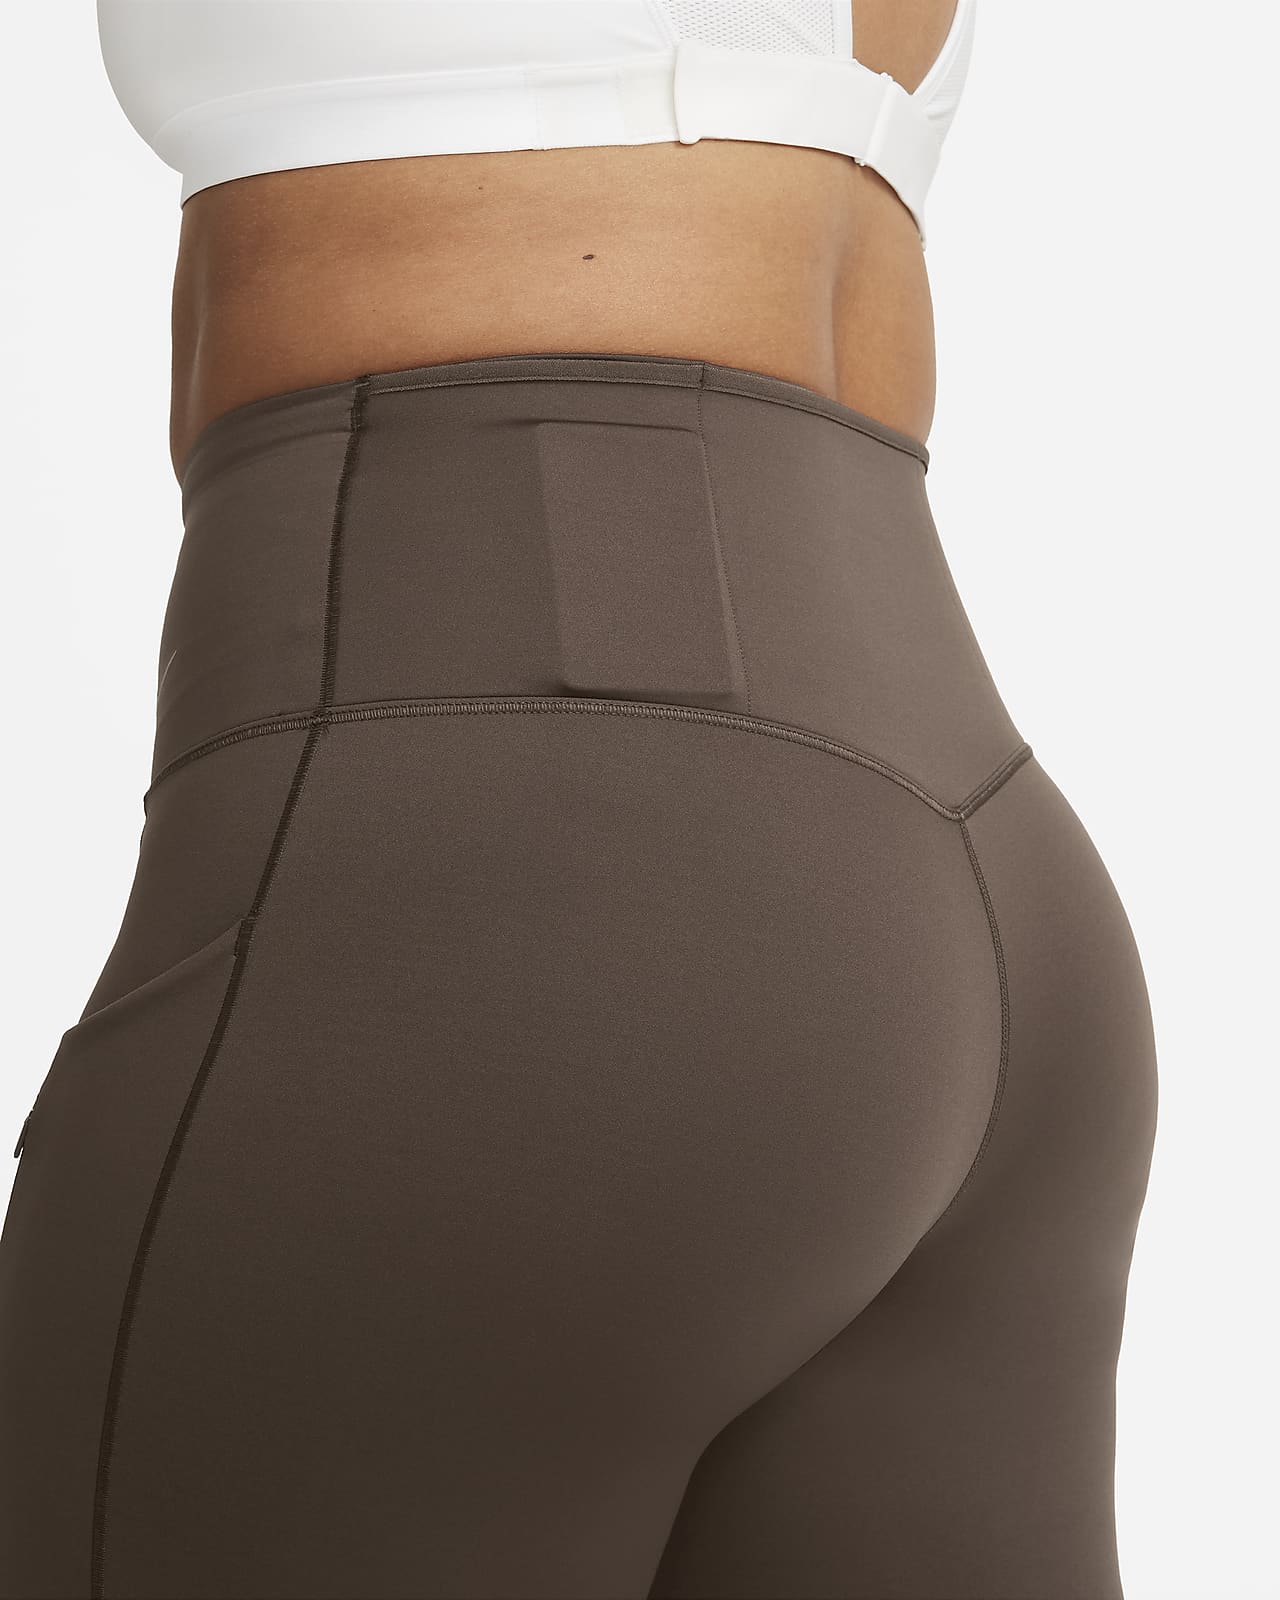 Nike Go Women's Firm-Support High-Waisted Full-Length Leggings with Pockets